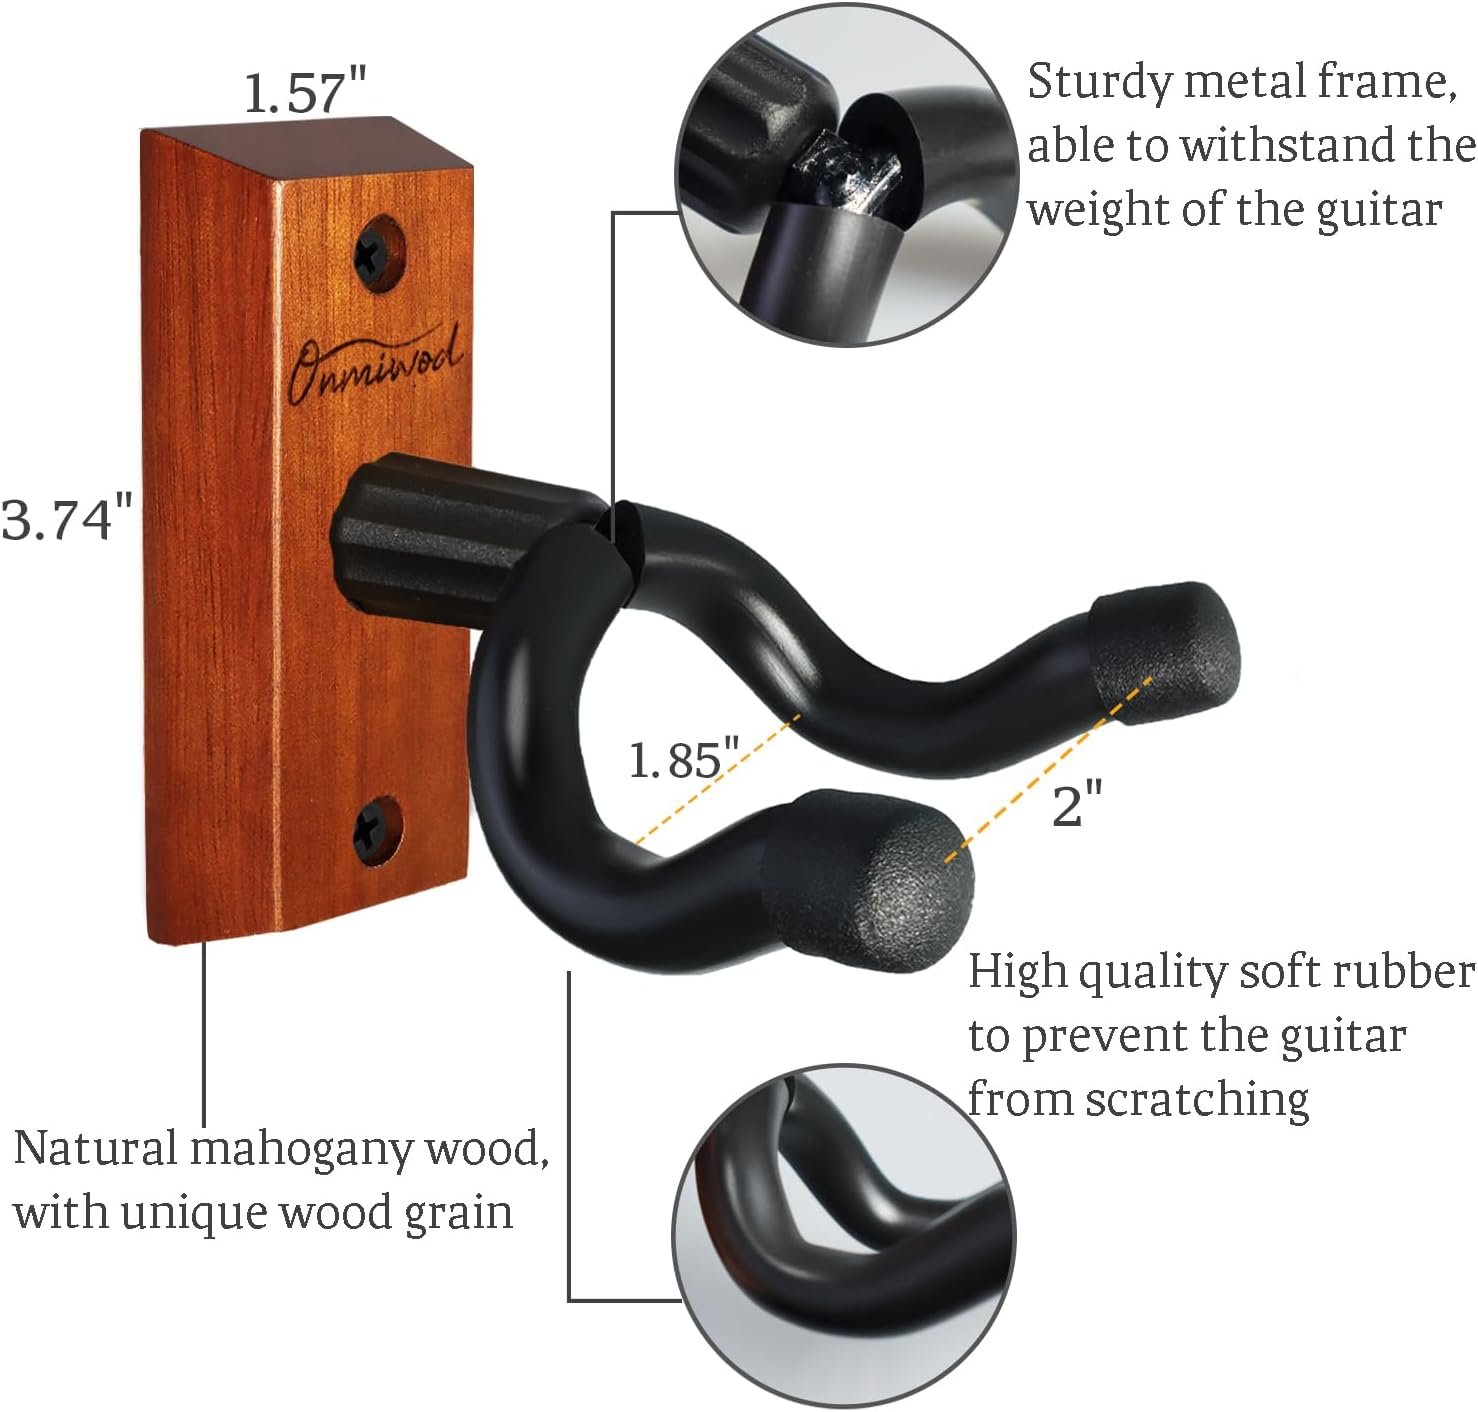 Guitar Wall Mount 2 Pack, Black Walnut Wood Guitar Hanger, U-Shaped Guitar Wall Hanger Mount, Guitar Holder Hook Stand Wall for Acoustic, Electric Guitar, Banjo, Bass, Gift for Guitar Player Men Boy